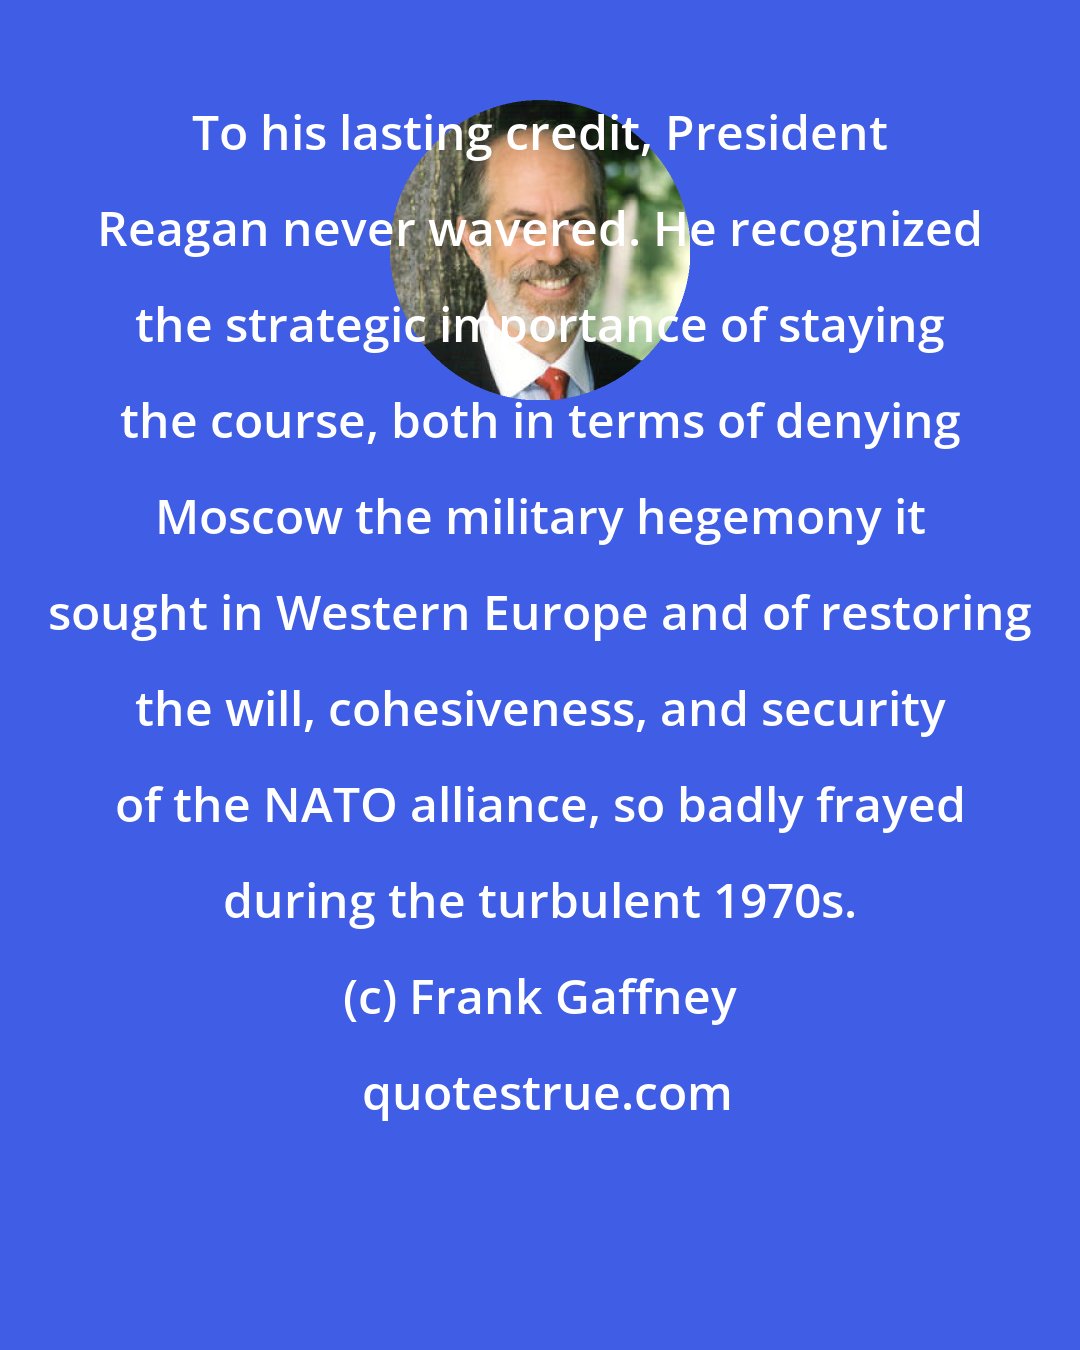 Frank Gaffney: To his lasting credit, President Reagan never wavered. He recognized the strategic importance of staying the course, both in terms of denying Moscow the military hegemony it sought in Western Europe and of restoring the will, cohesiveness, and security of the NATO alliance, so badly frayed during the turbulent 1970s.